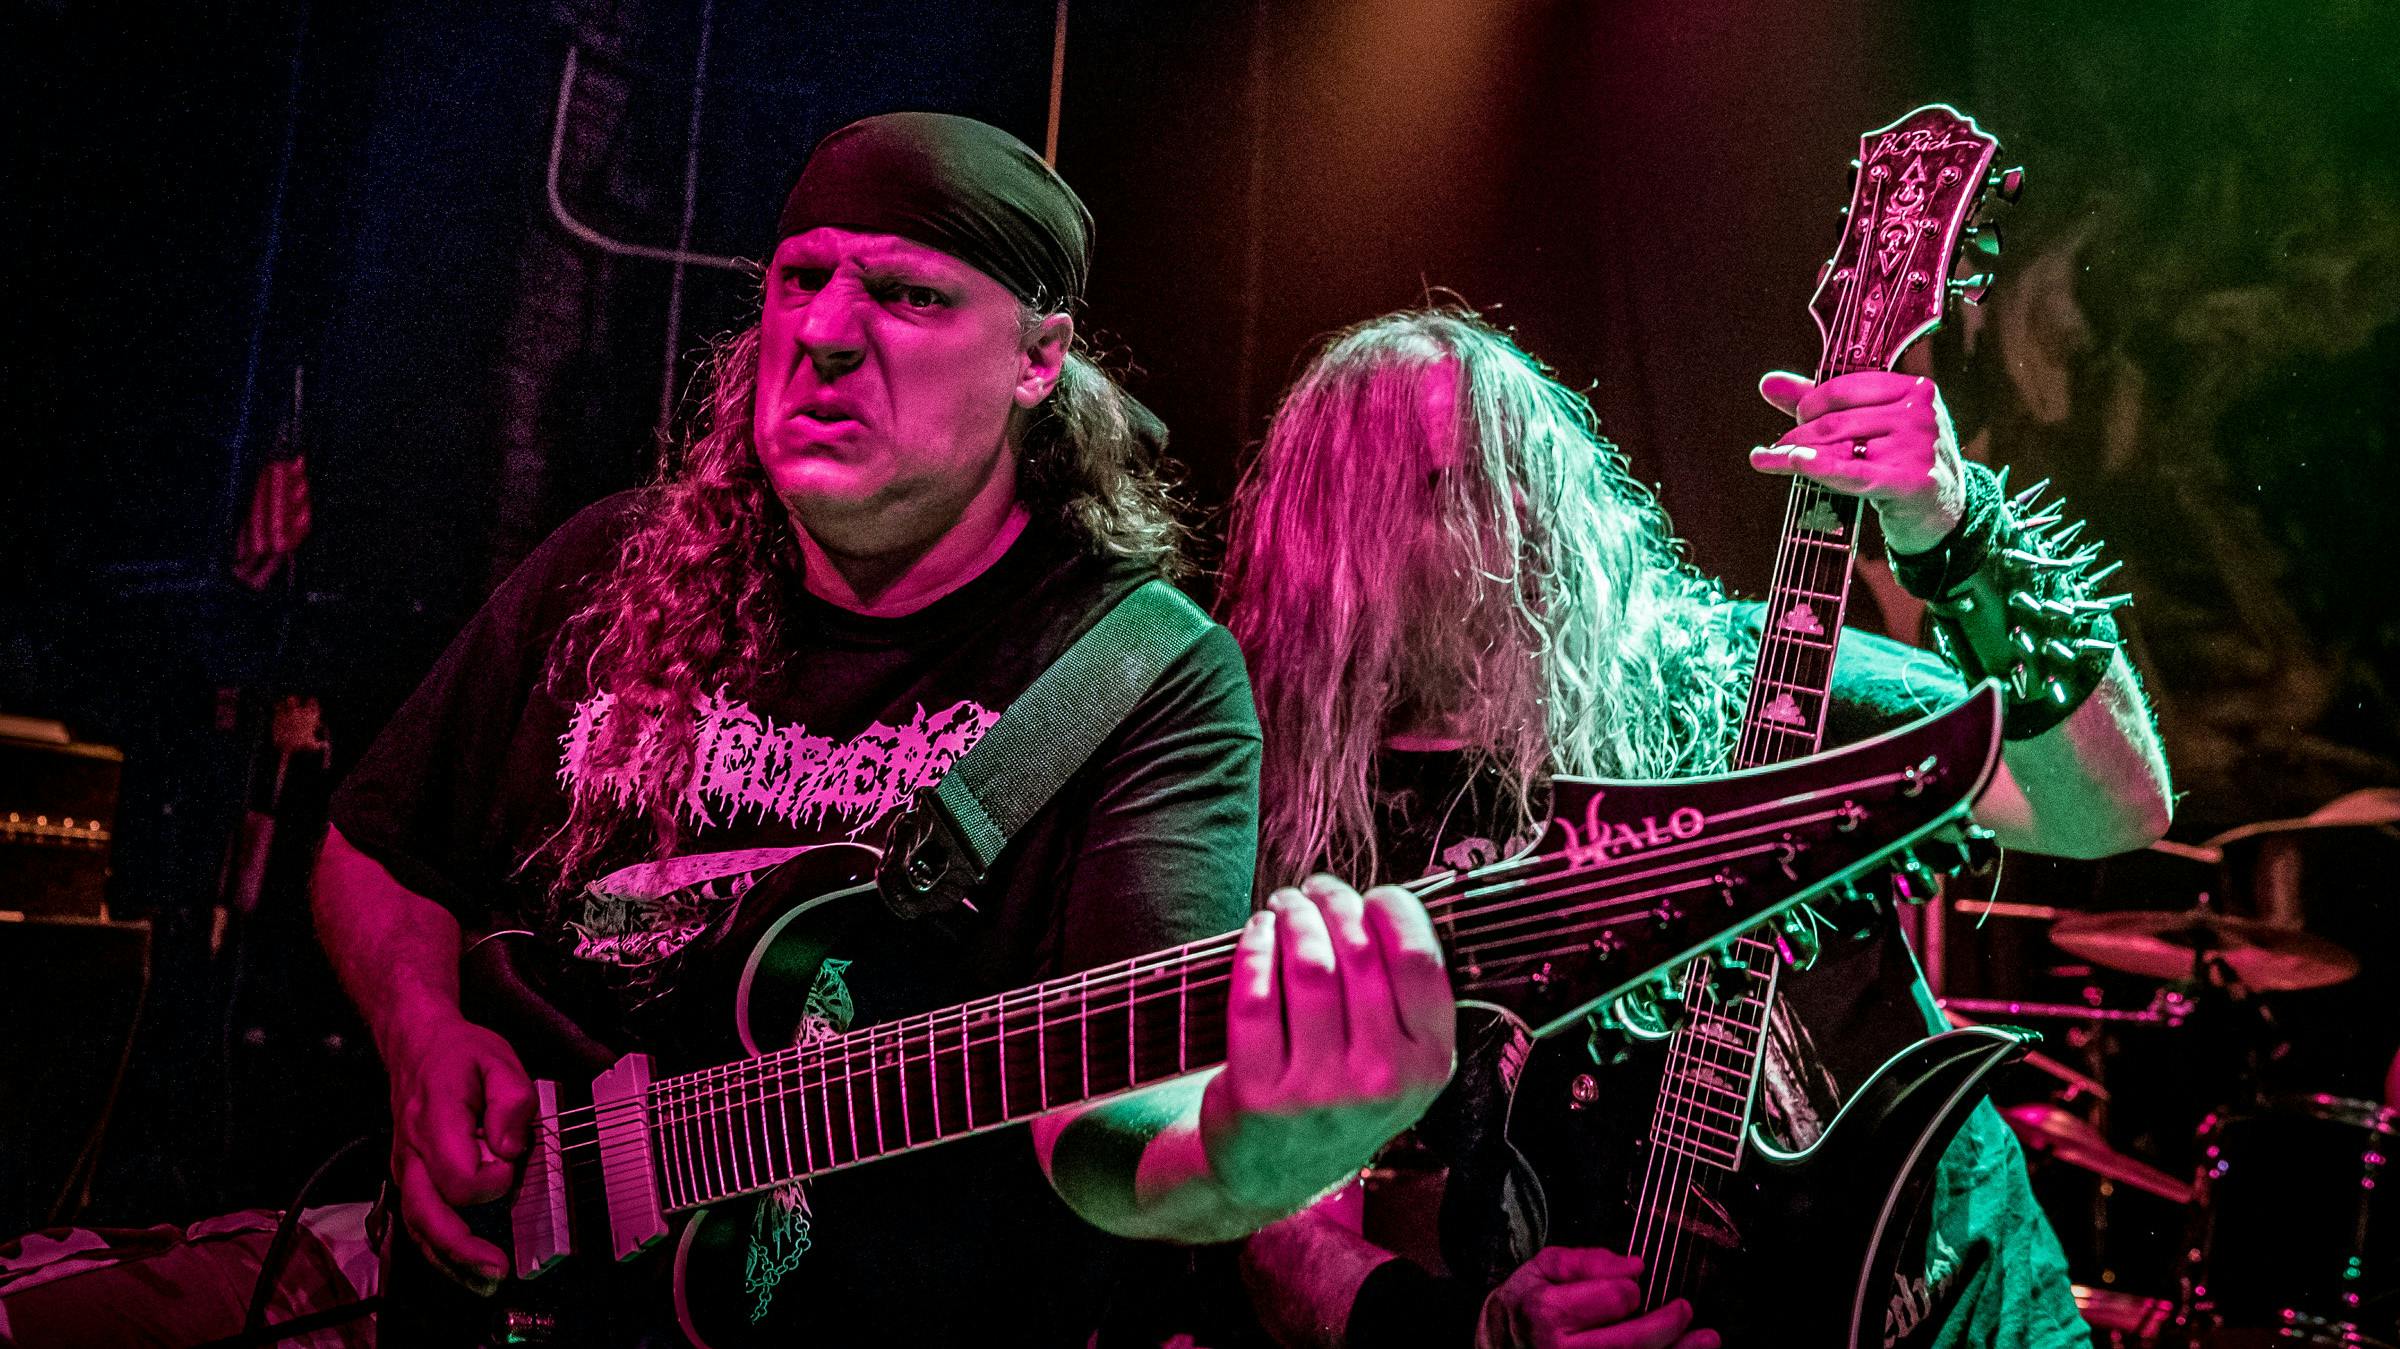 Dying Fetus, Incantation, Gatecreeper, and Genocide Pact Infect NYC on Relapse Contamination Tour